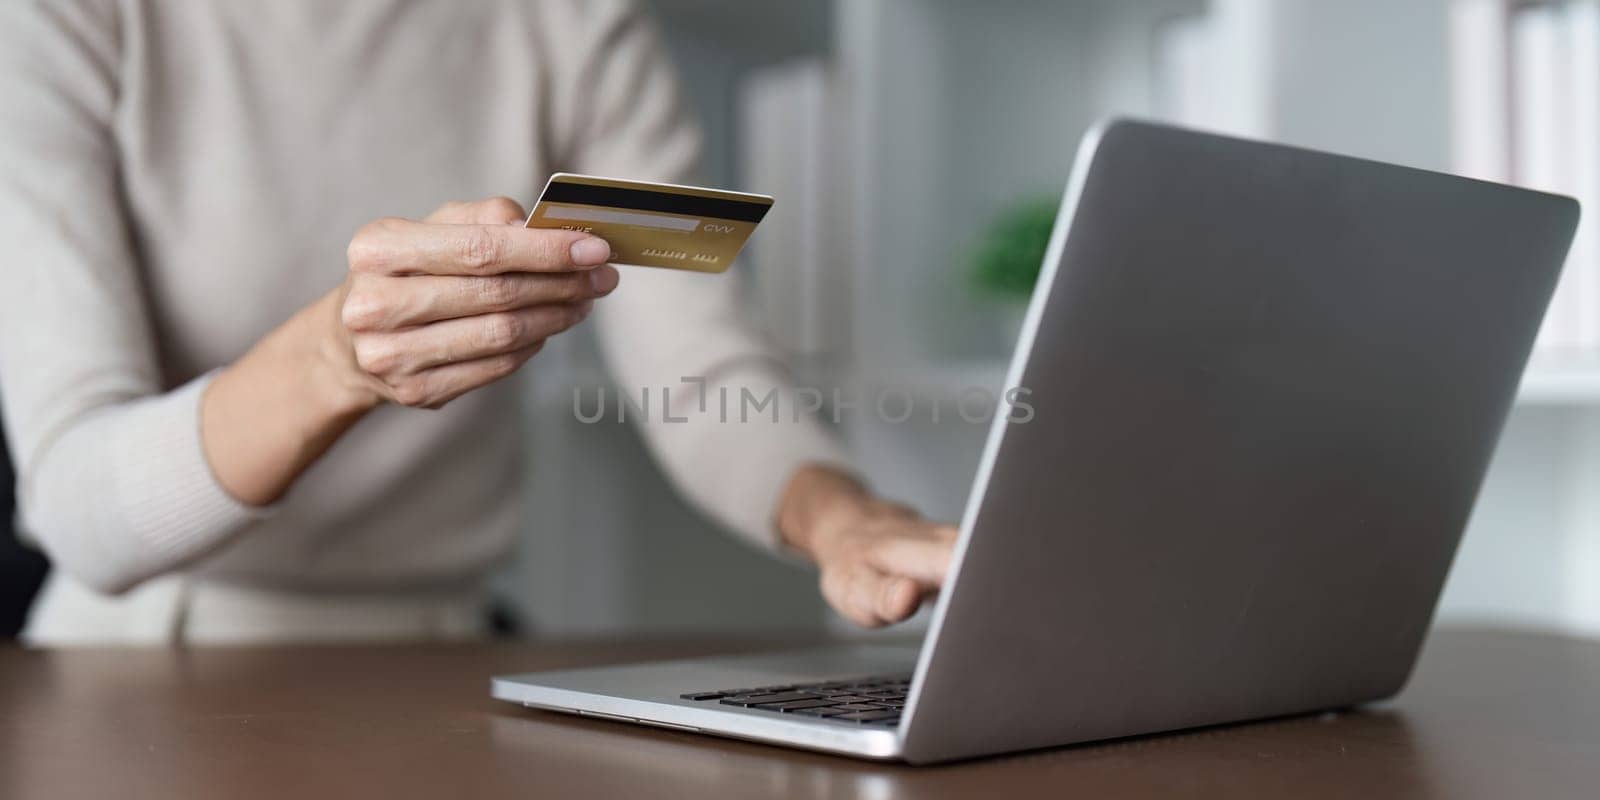 A woman is using a laptop to pay for something with a credit card by nateemee